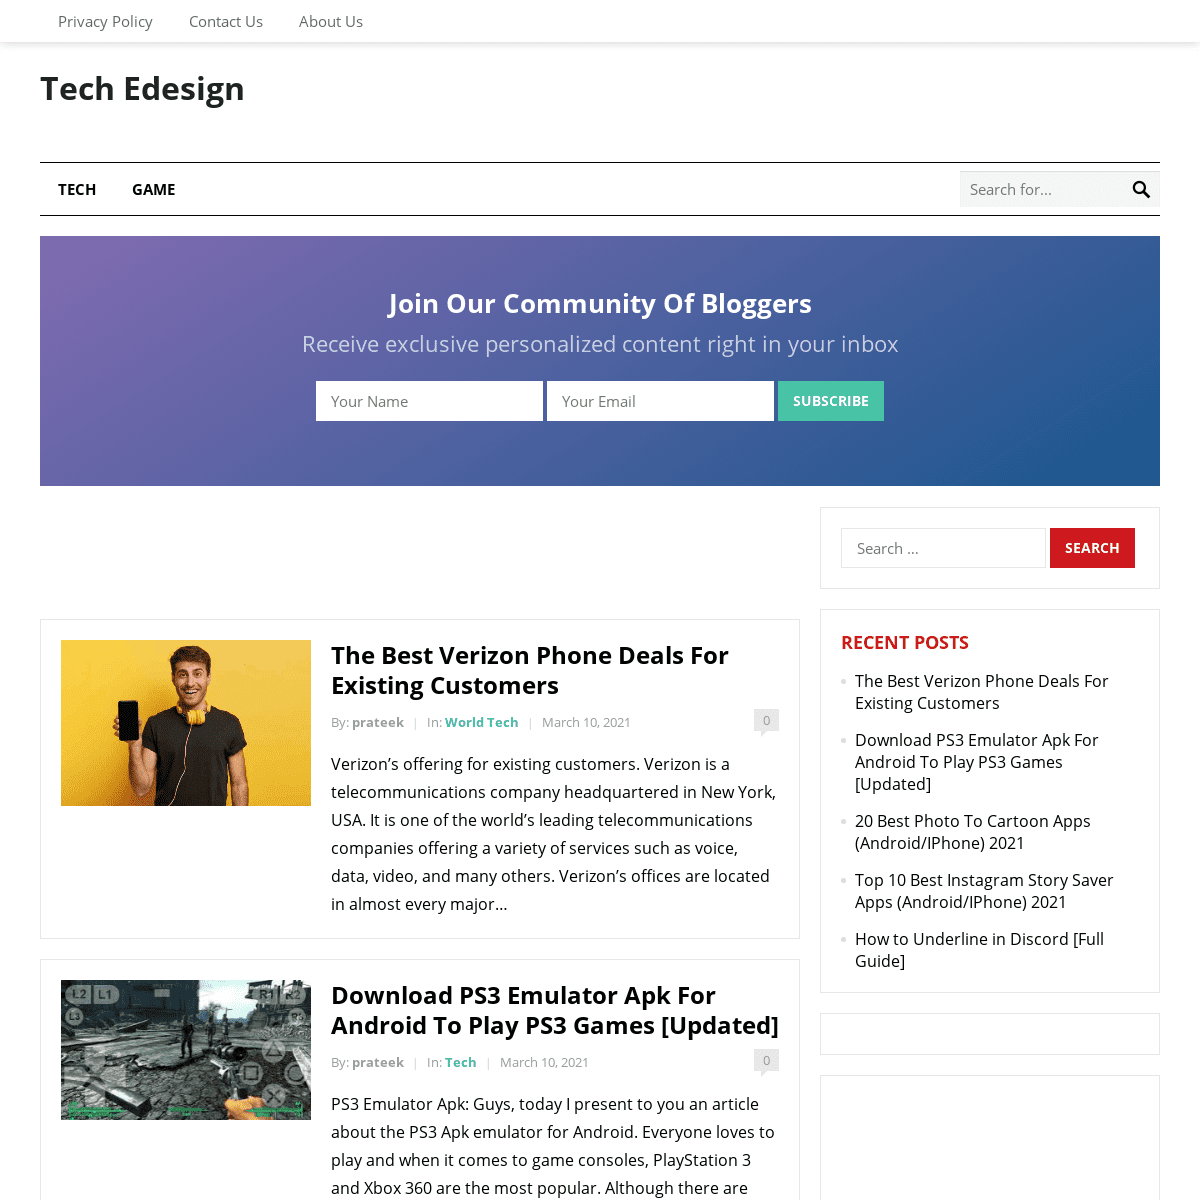 A complete backup of https://techedesign.com